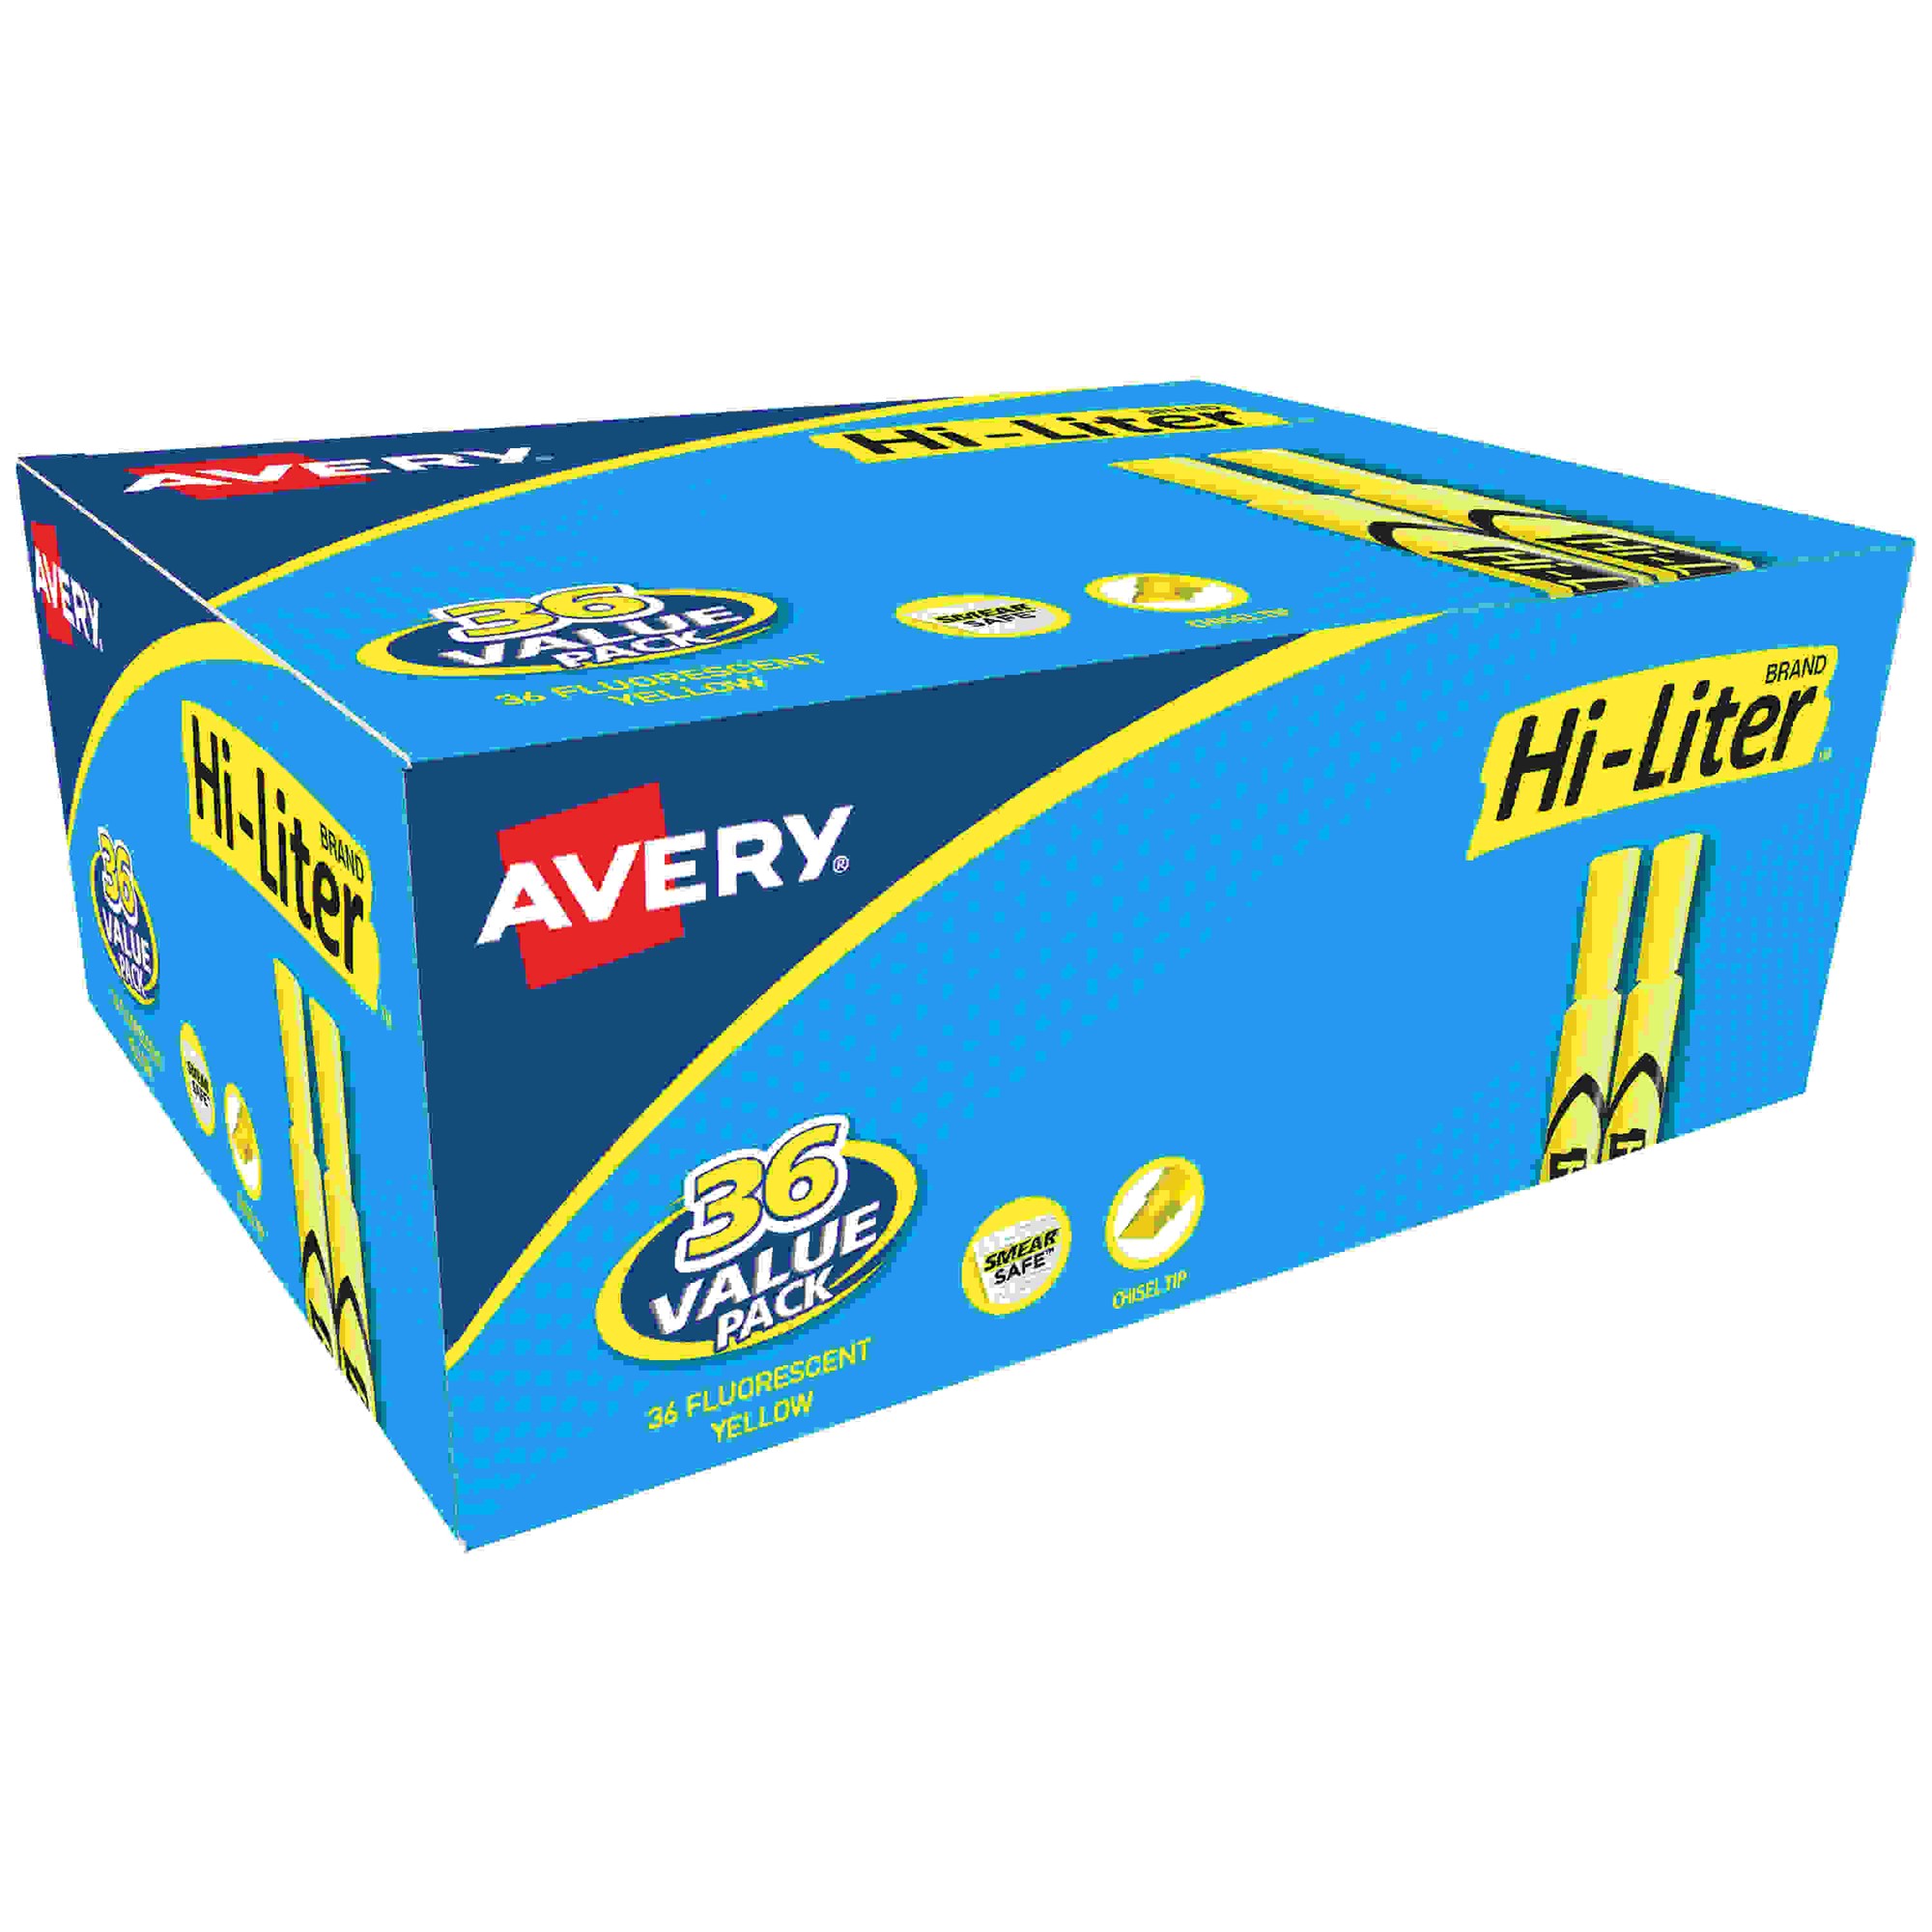 Avery Hi-Liter Desk-Style Highlighters - Chisel Marker Point Style - Fluorescent Yellow Water Based Ink - 36 / Box